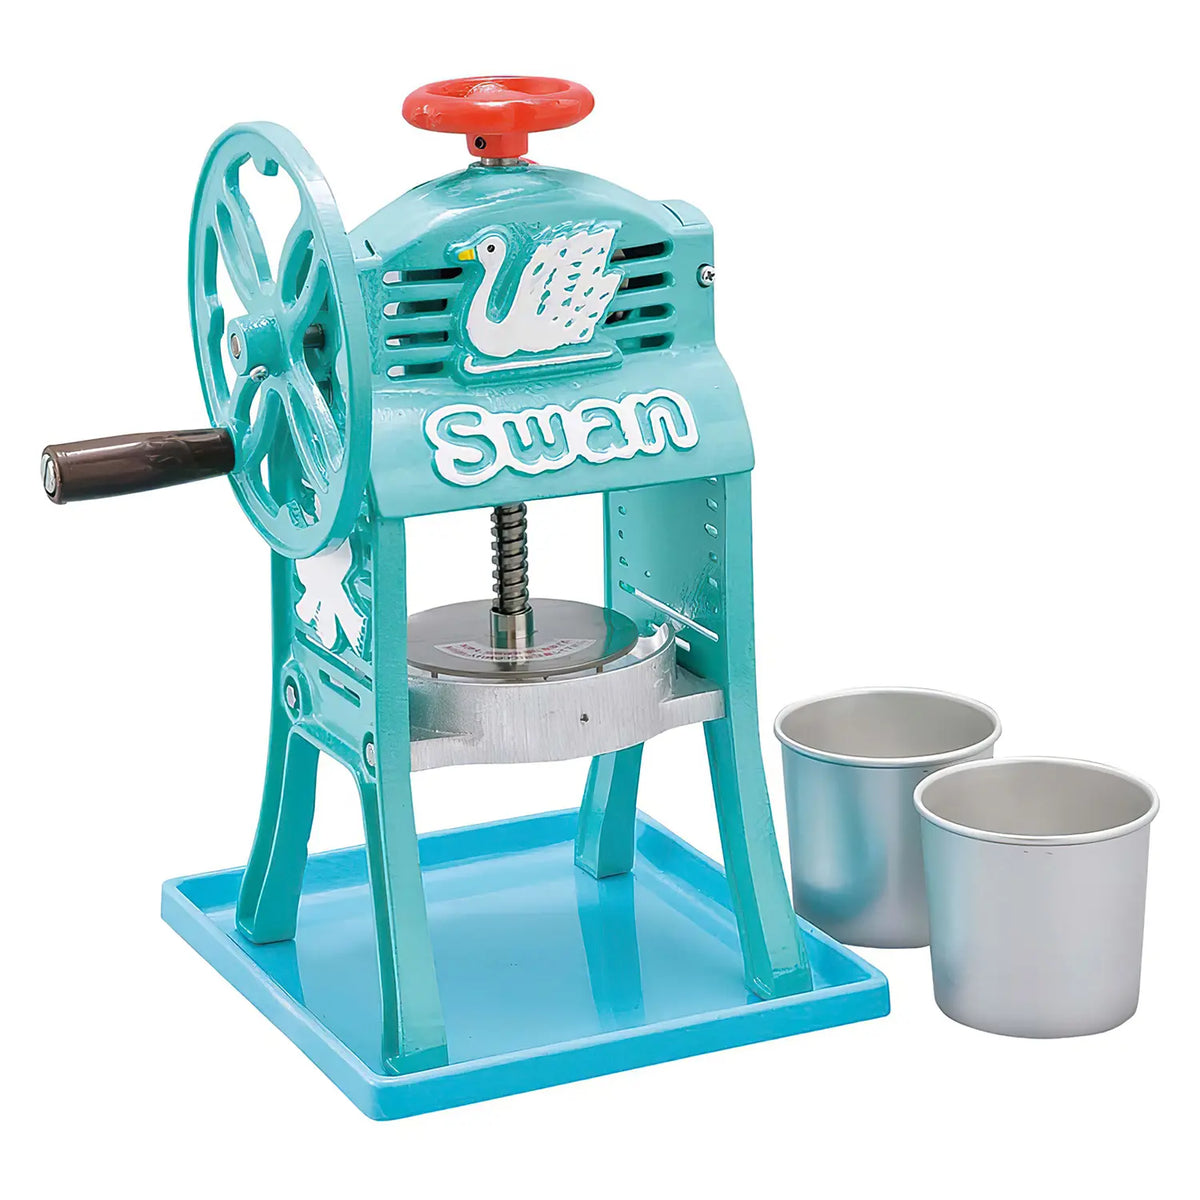 Swan Cast Iron Manual Shaved Ice Machine Green